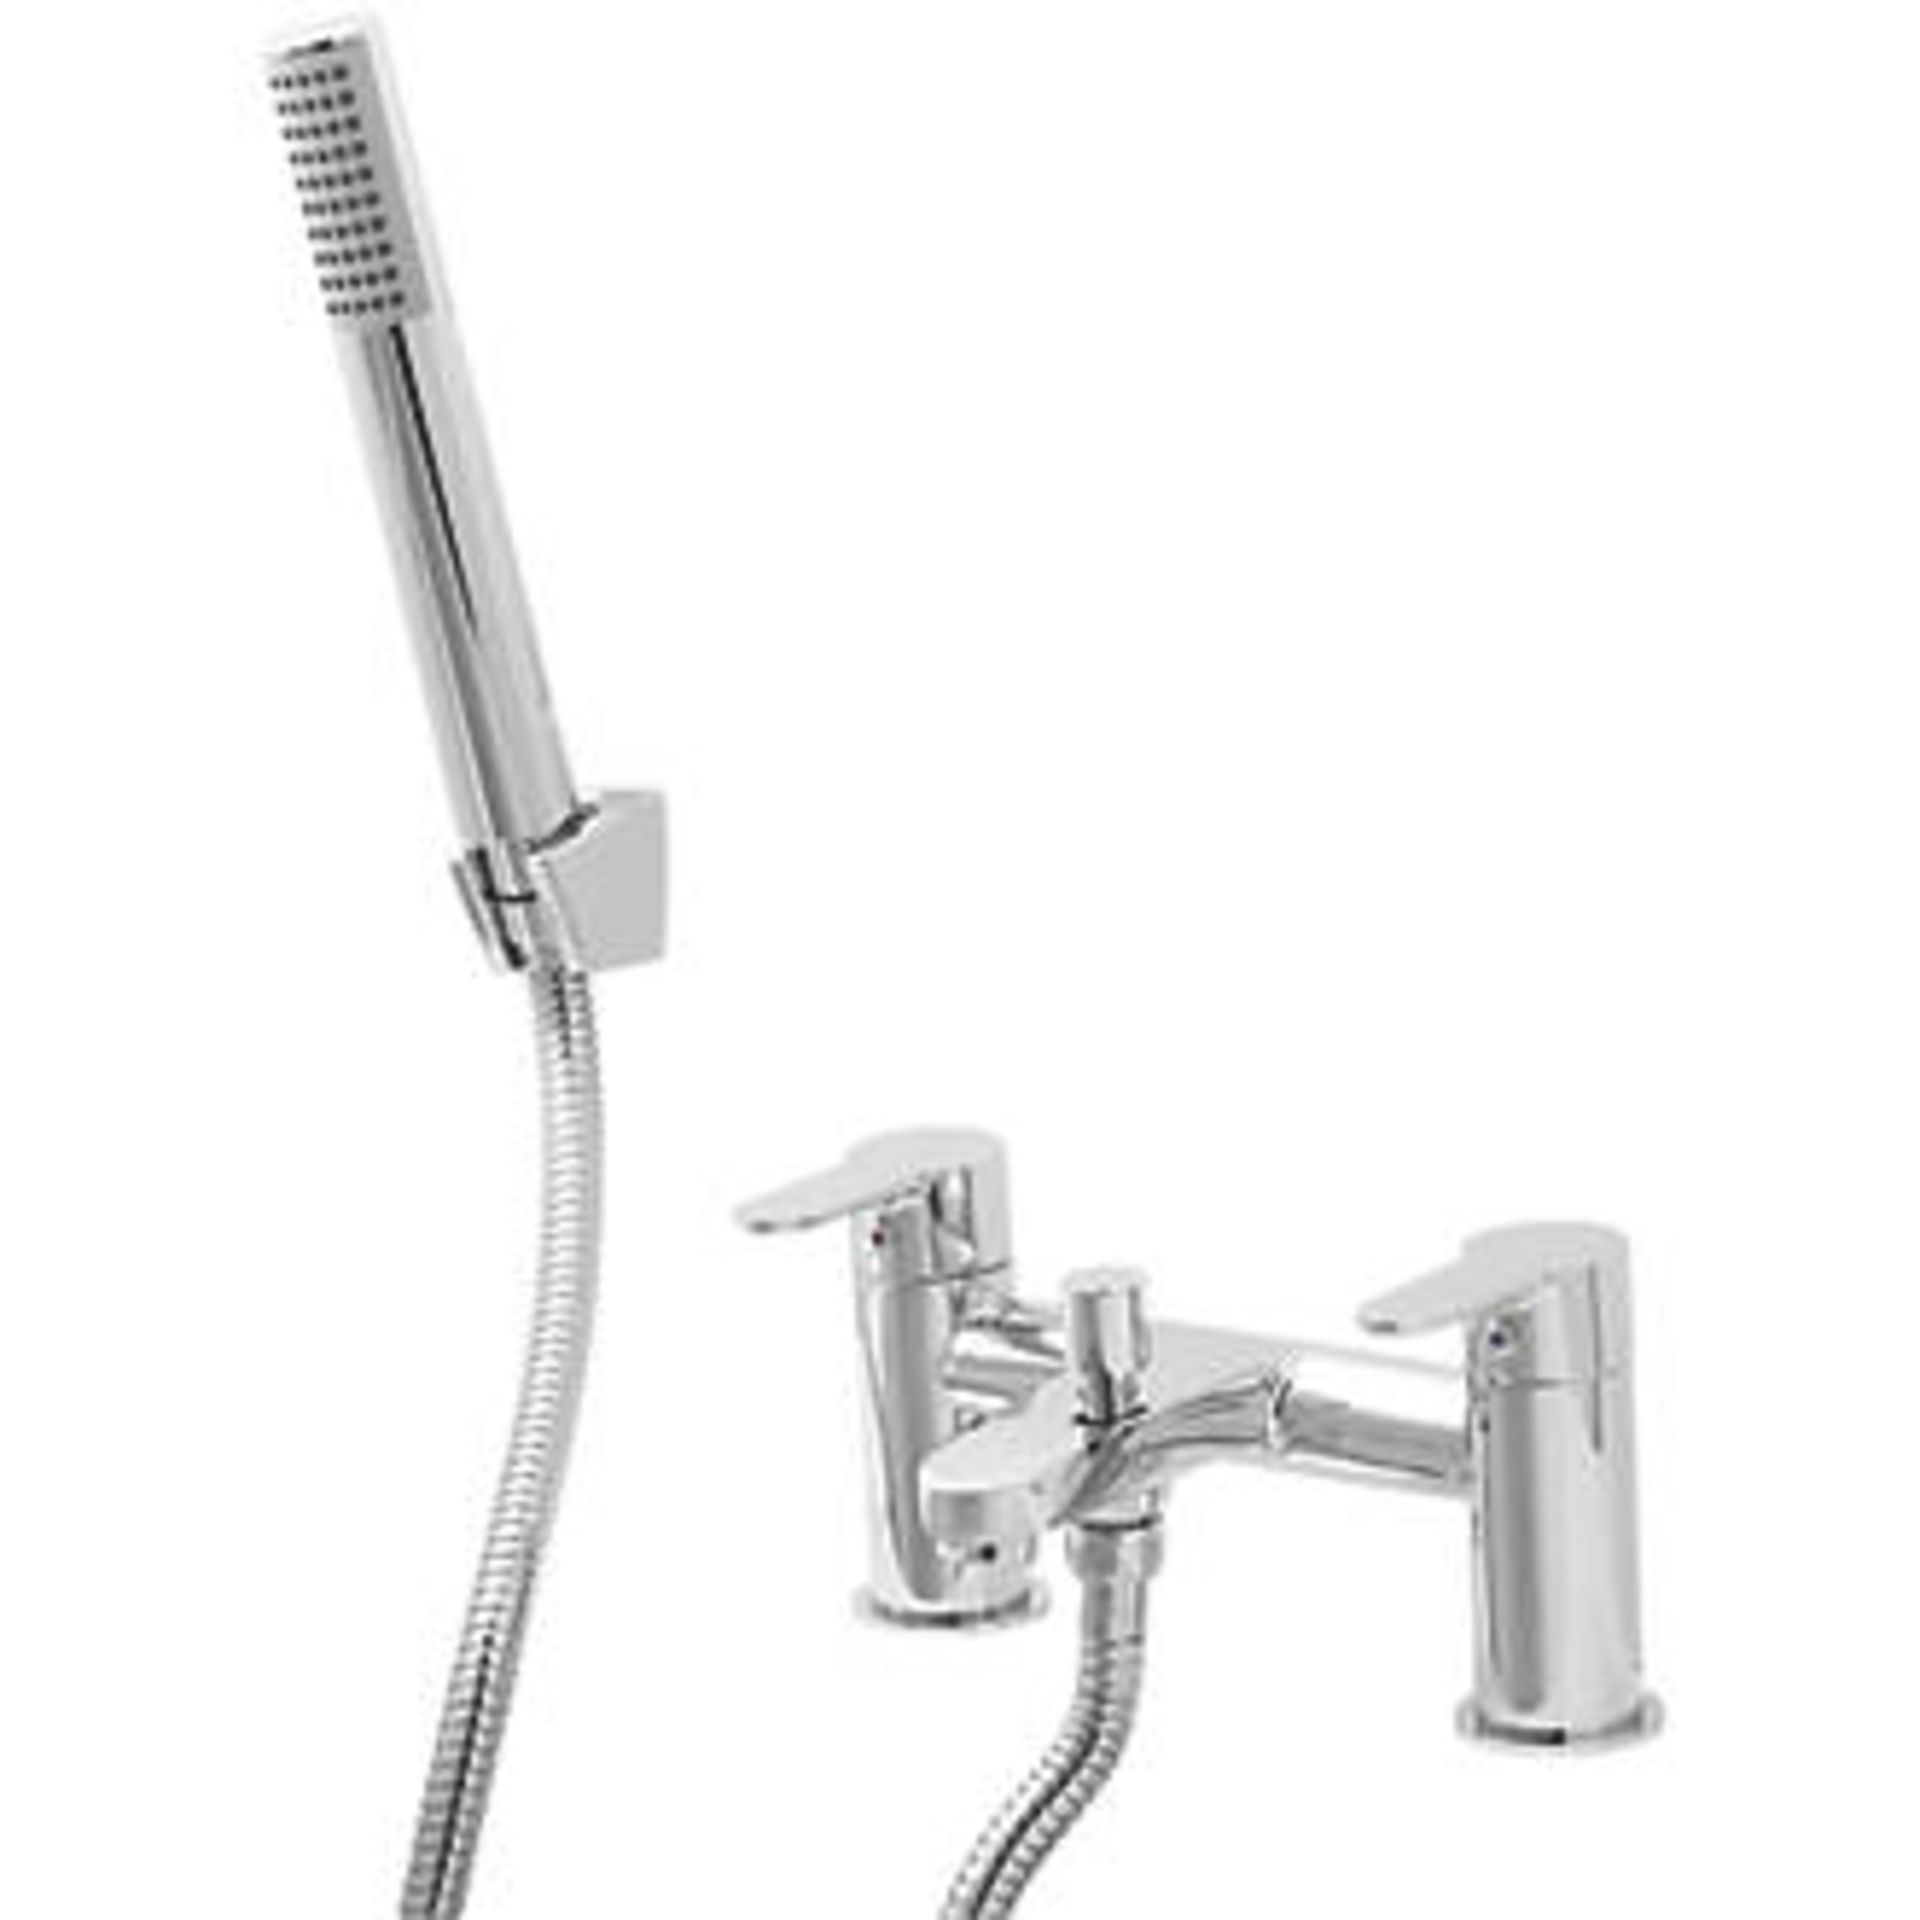 (AQ10) LECCI DECK-MOUNTED BATH/SHOWER MIXER TAP. 1/4 Turn Operation Suitable for High Pressure...